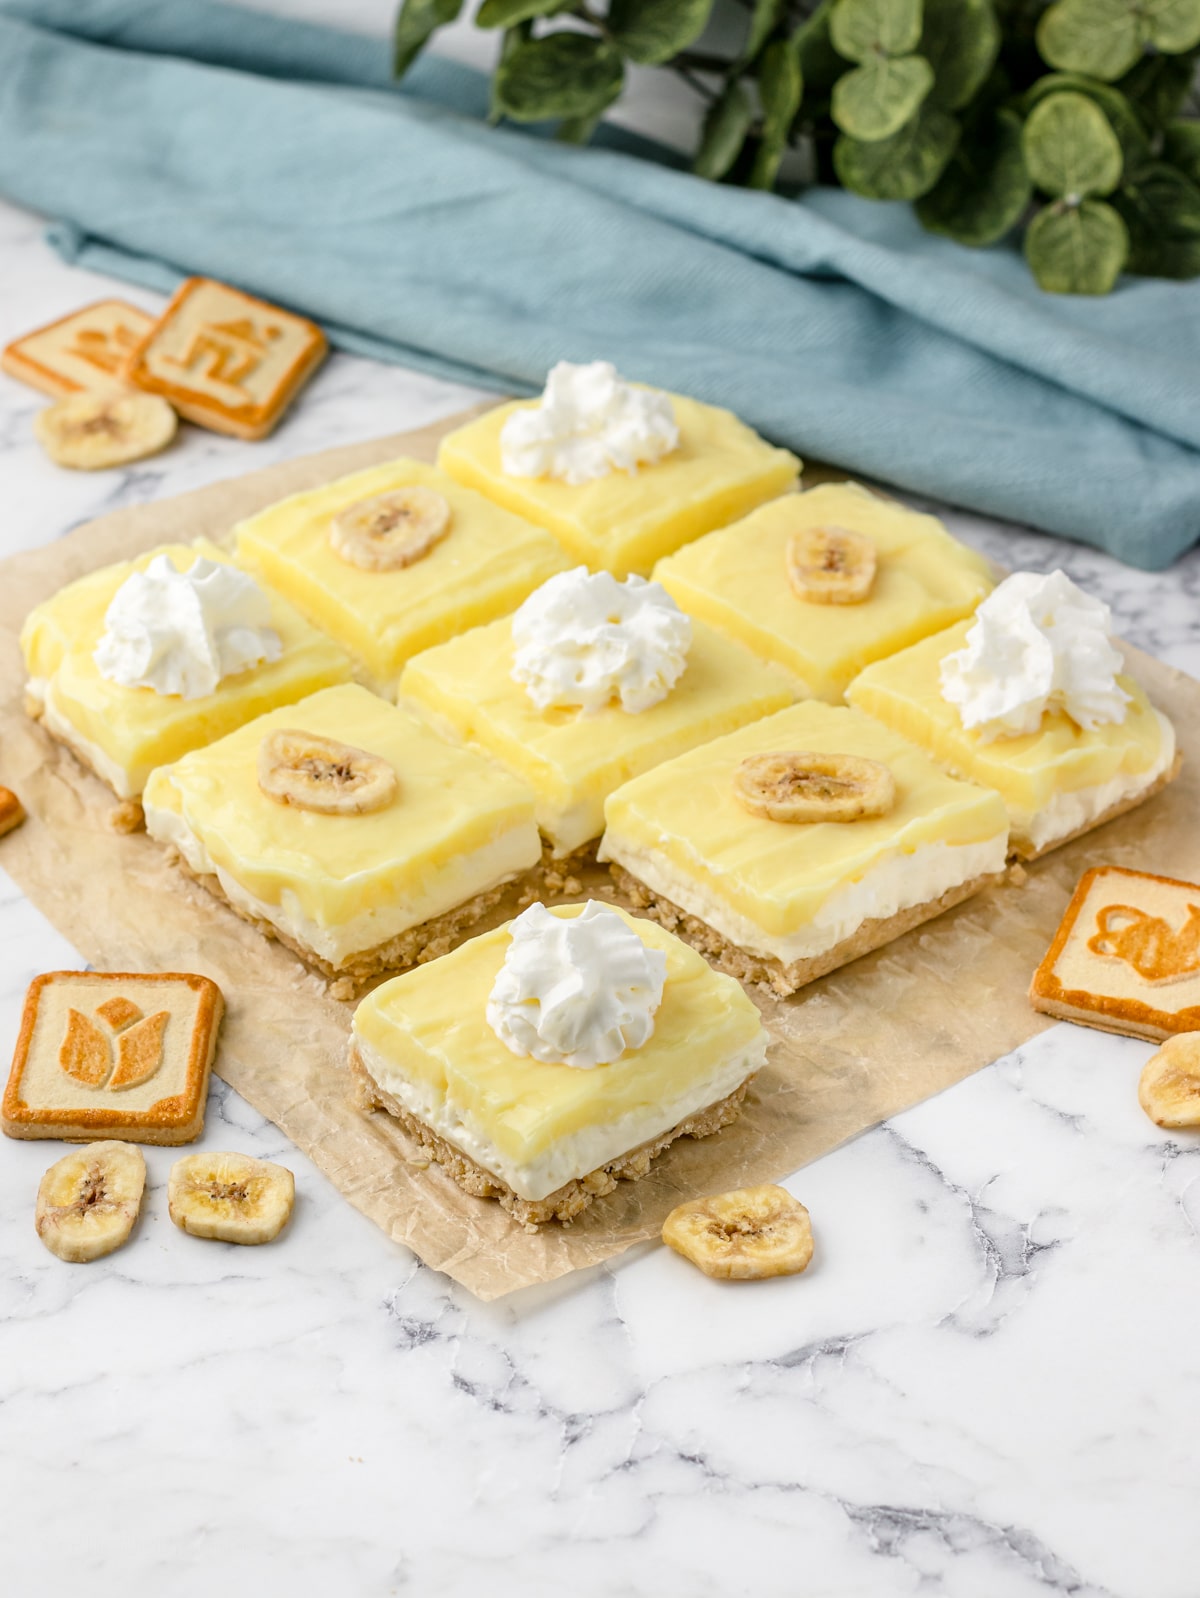 Banana Pudding Cheesecake Bars cut in 9 slices topped with whipped cream and banana chips.